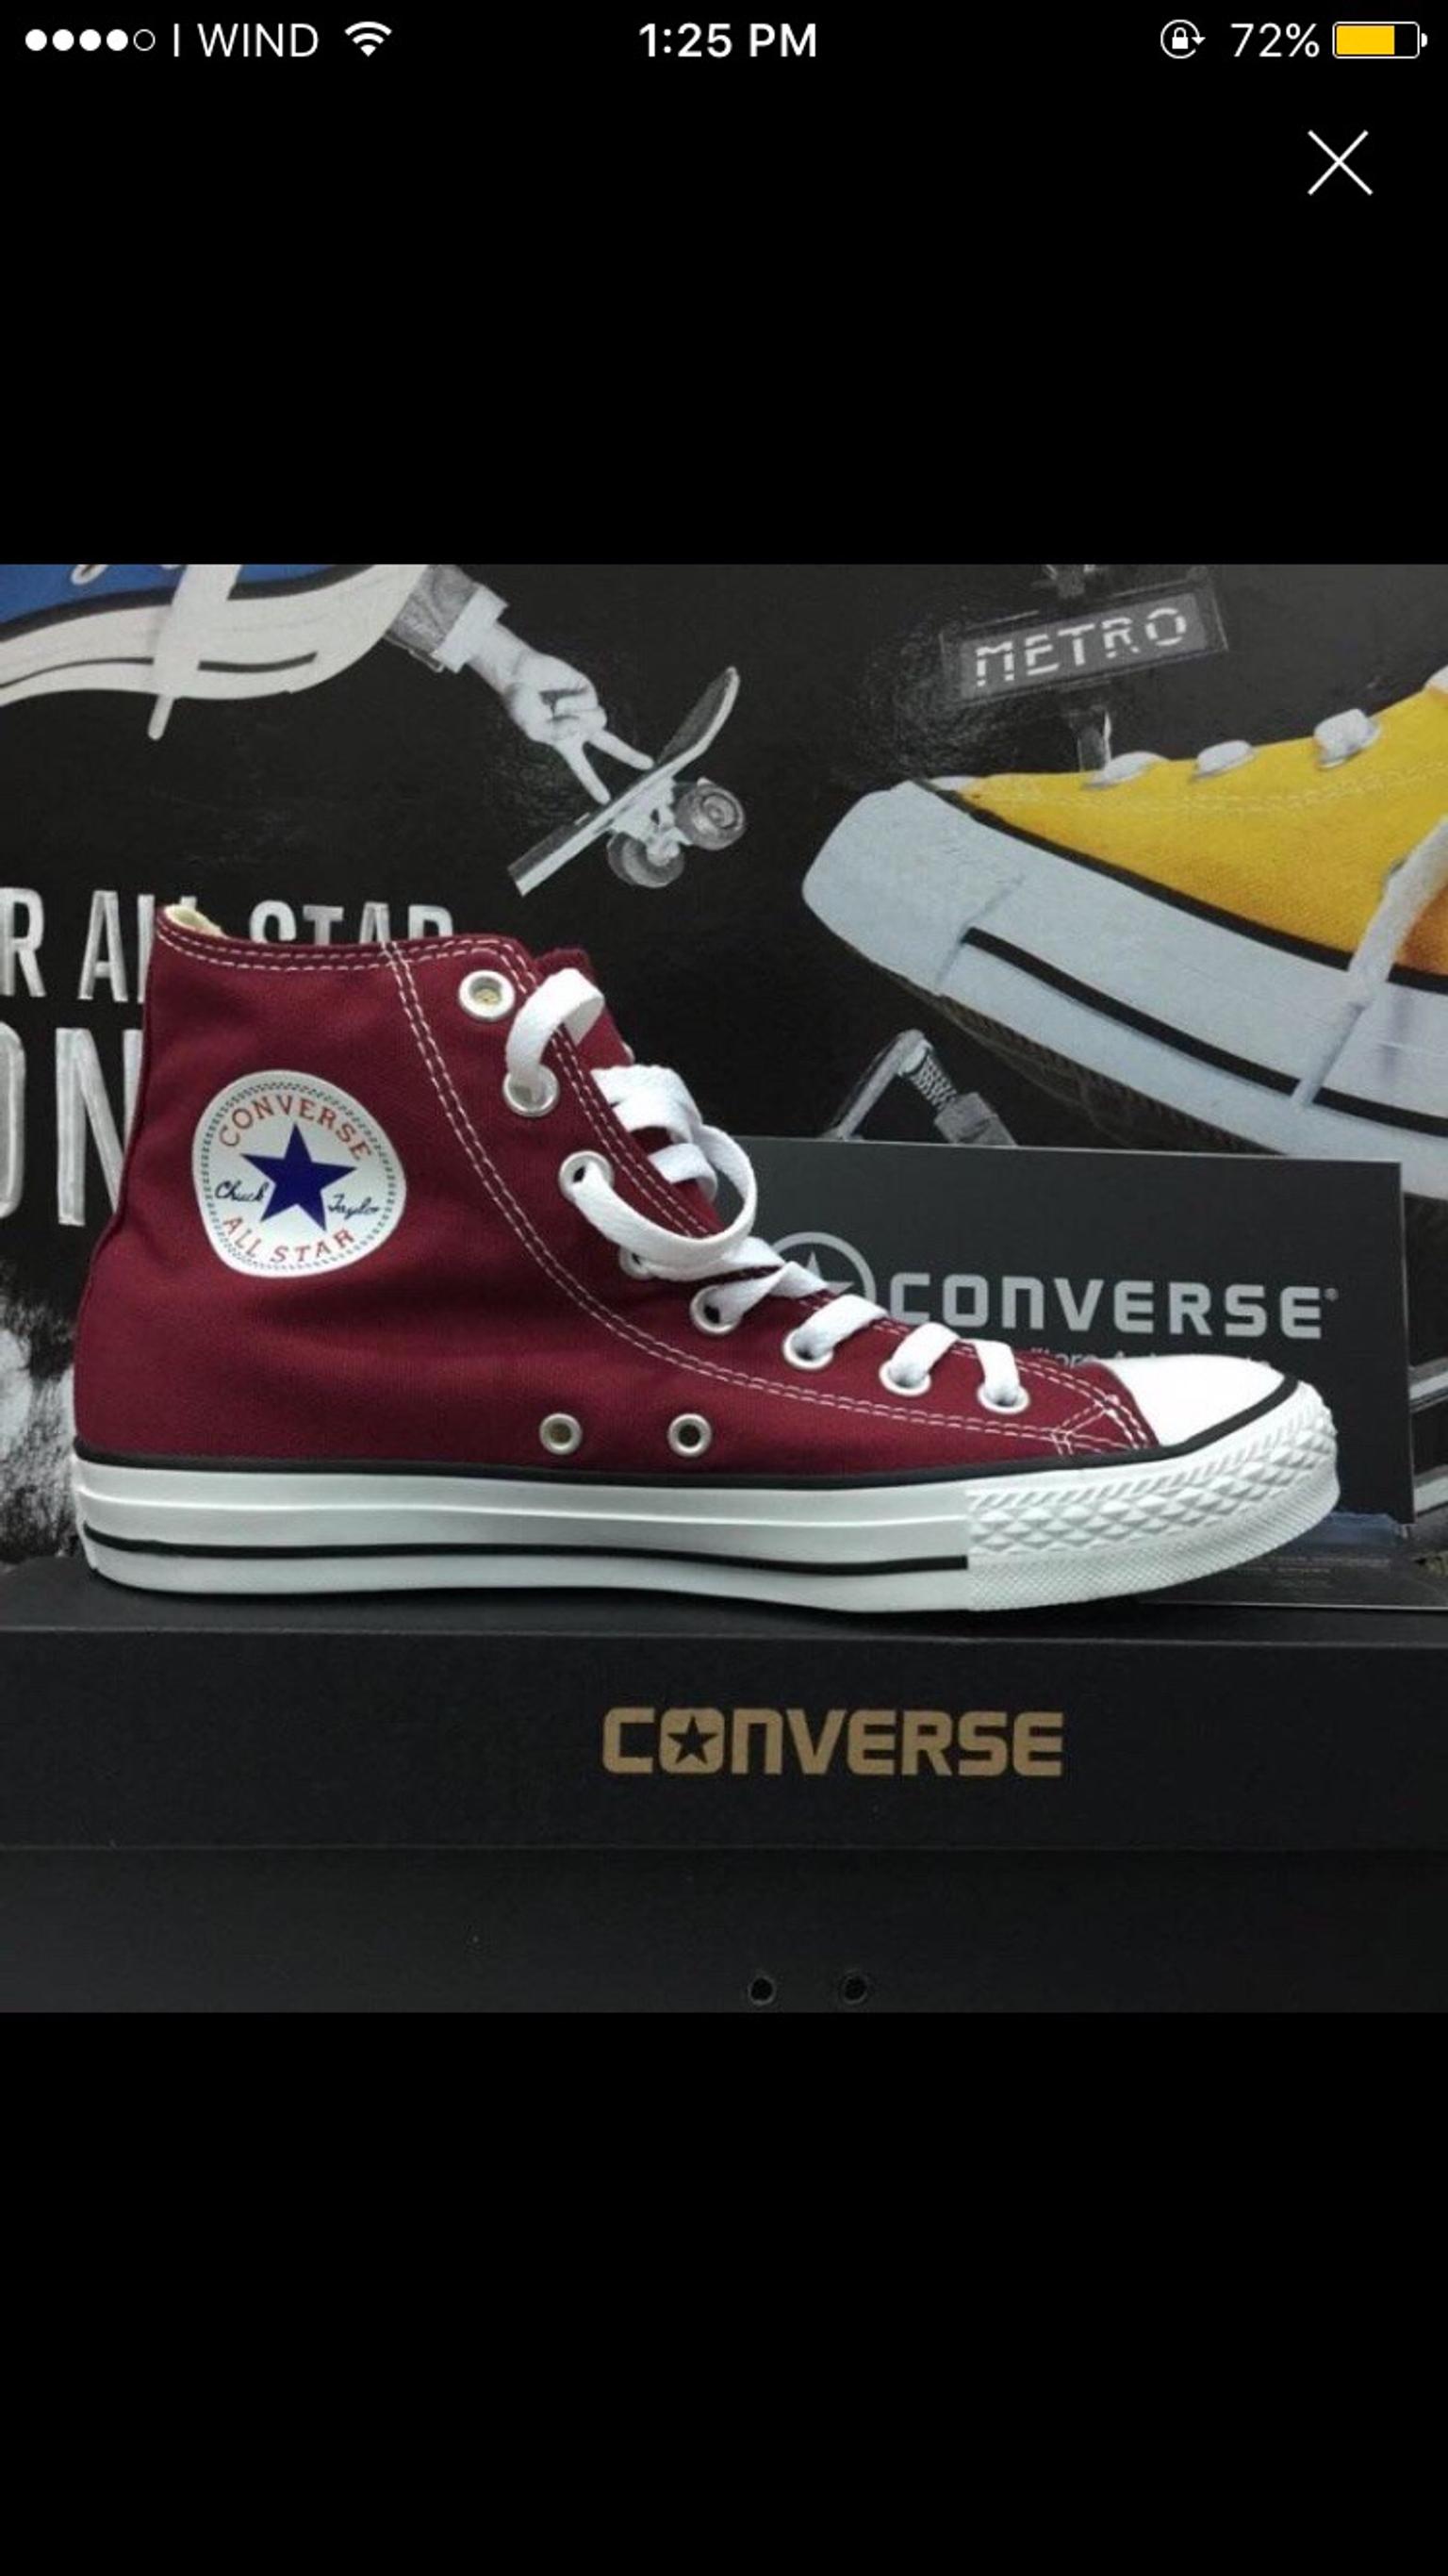 Converse all star in 31030 Dosson for €30.00 for sale | Shpock